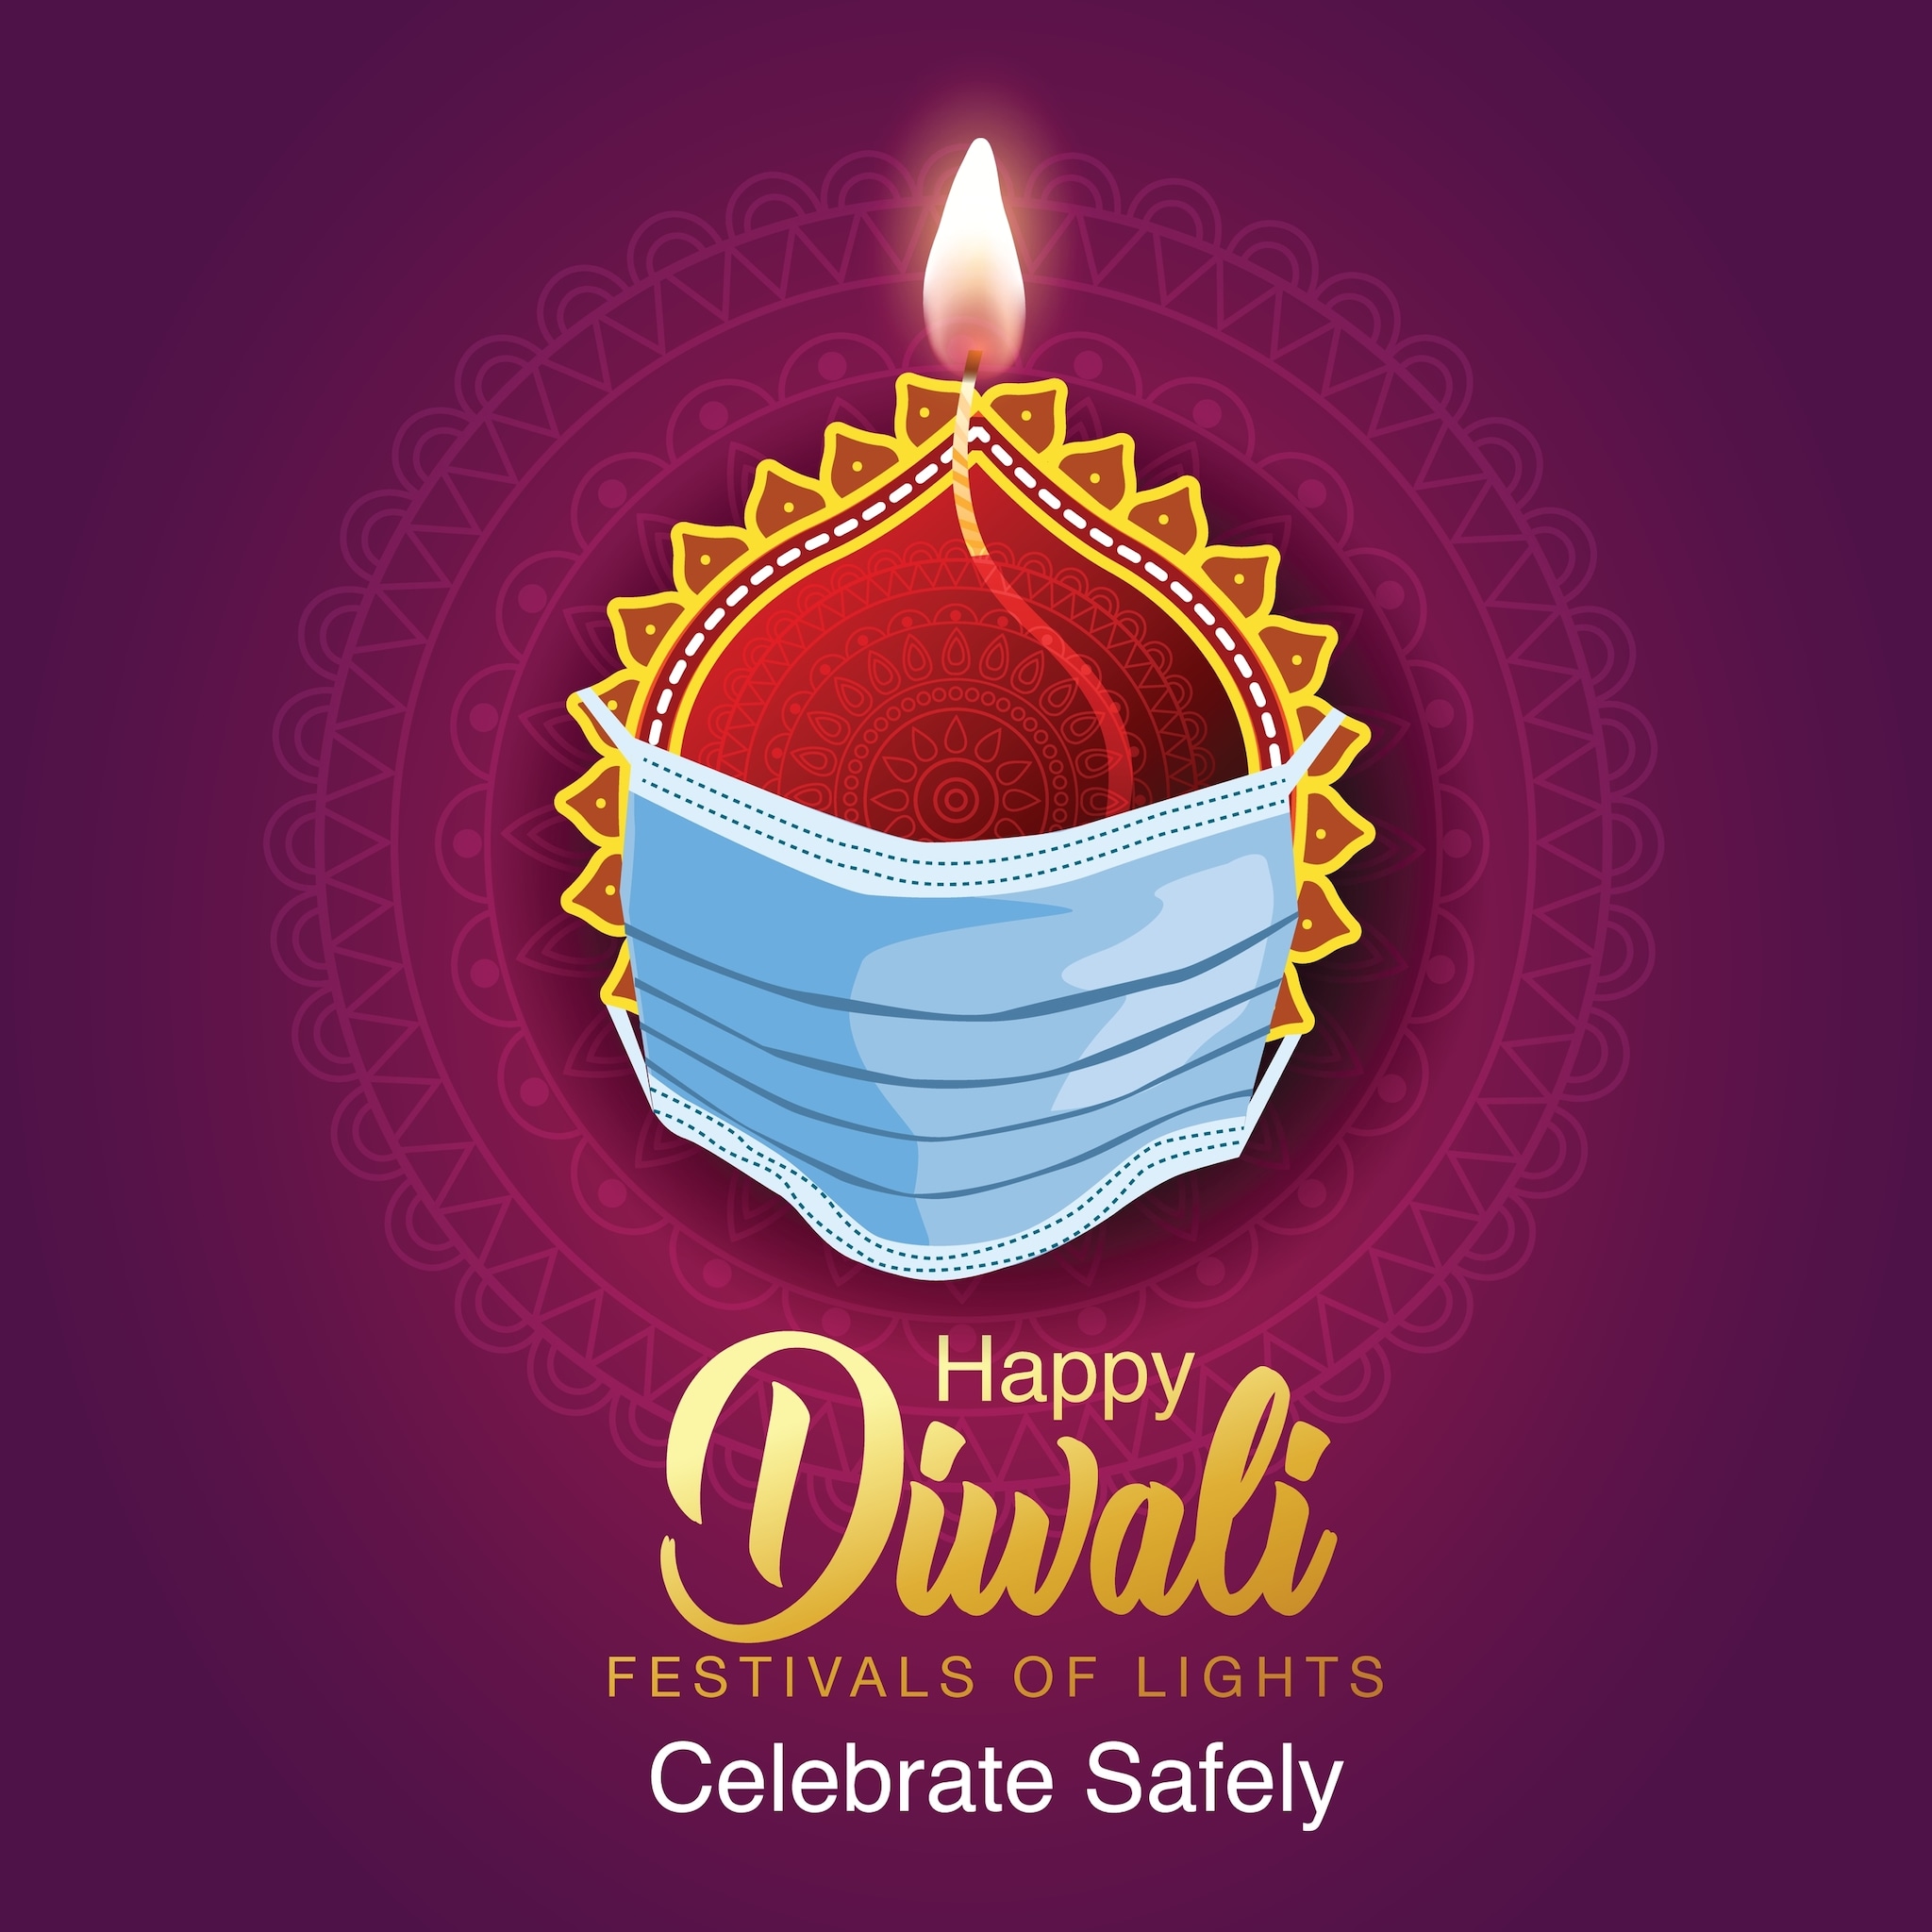 Happy Diwali 2021: Wishes, Images, Status, Quotes, Messages and WhatsApp  Greetings to Share on Deepavali